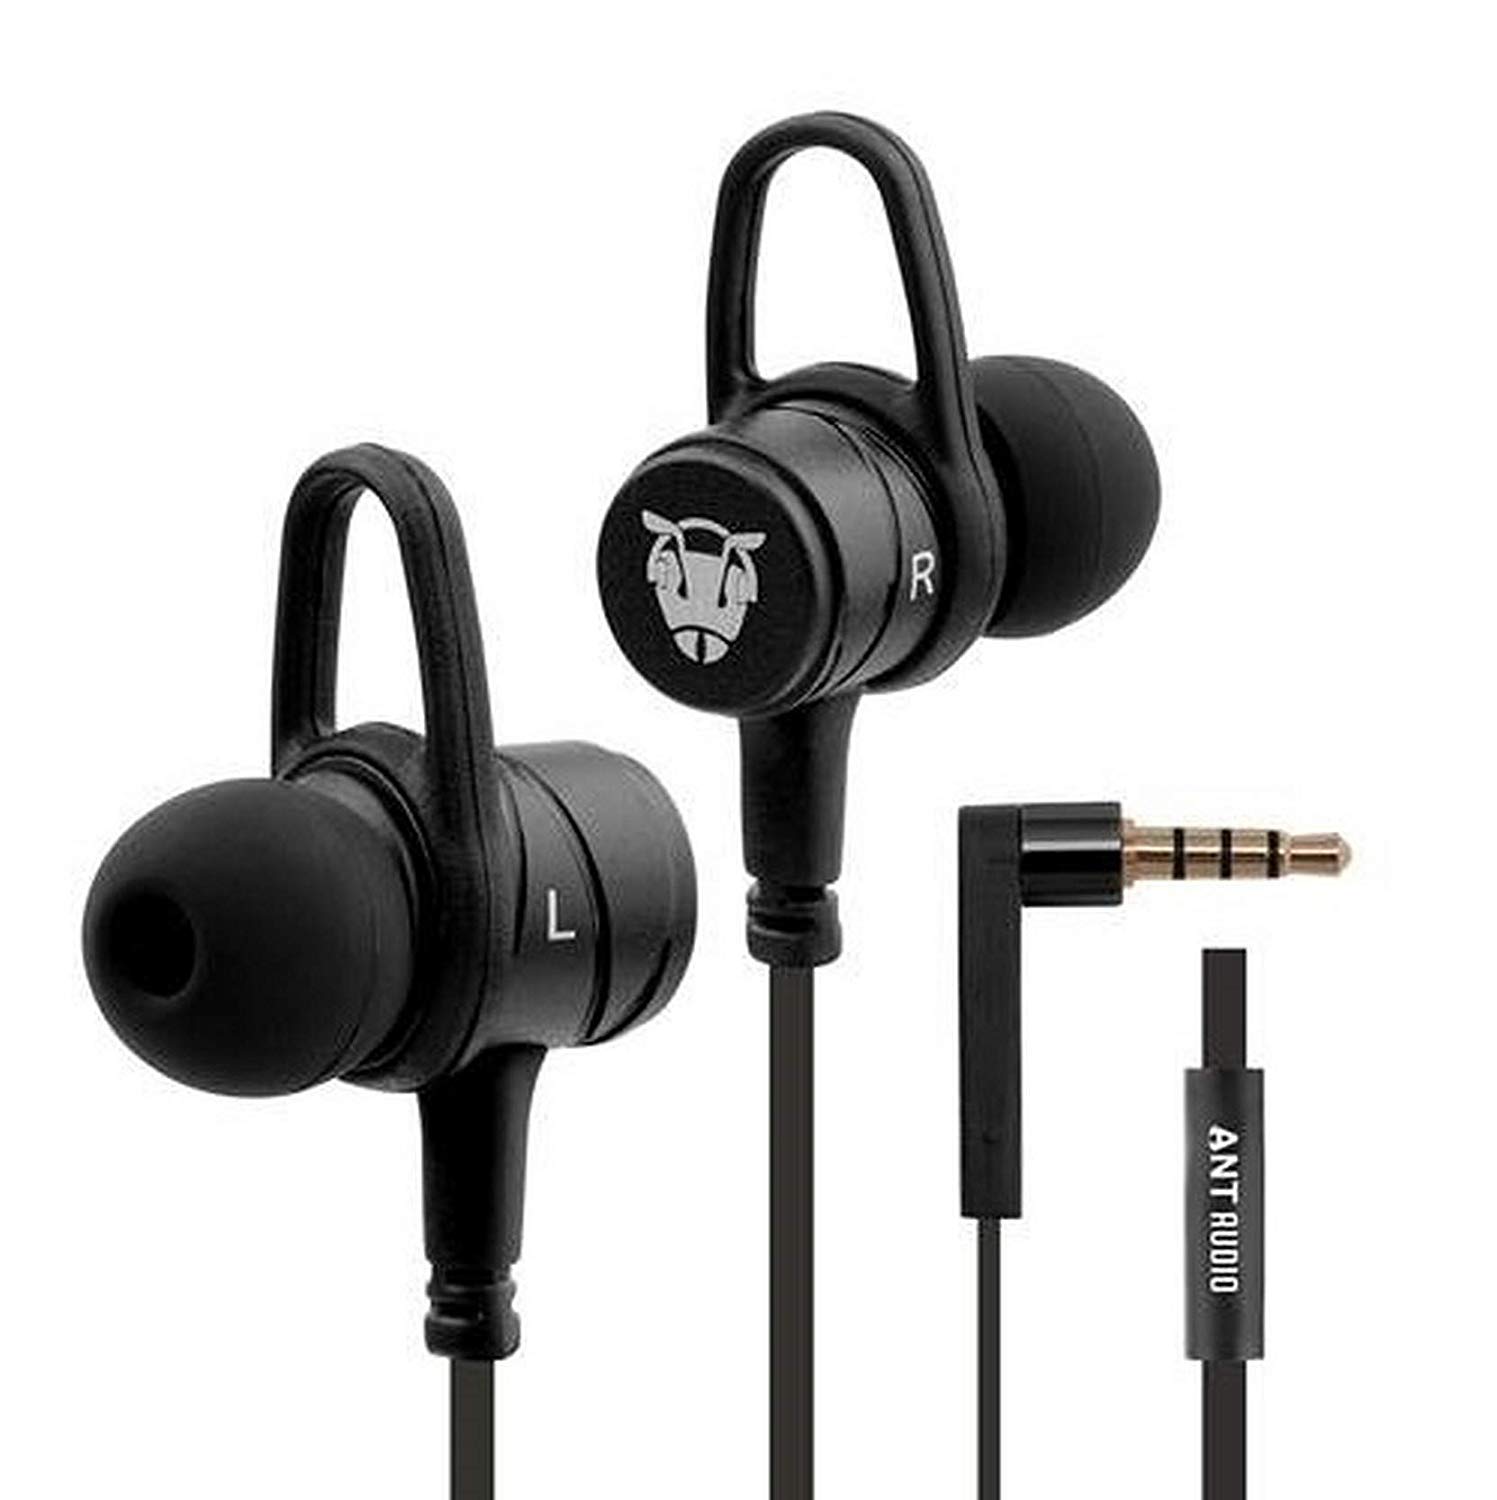 Buy ANT AUDIO W56 Wired in Ear Earphone with Mic (Black)